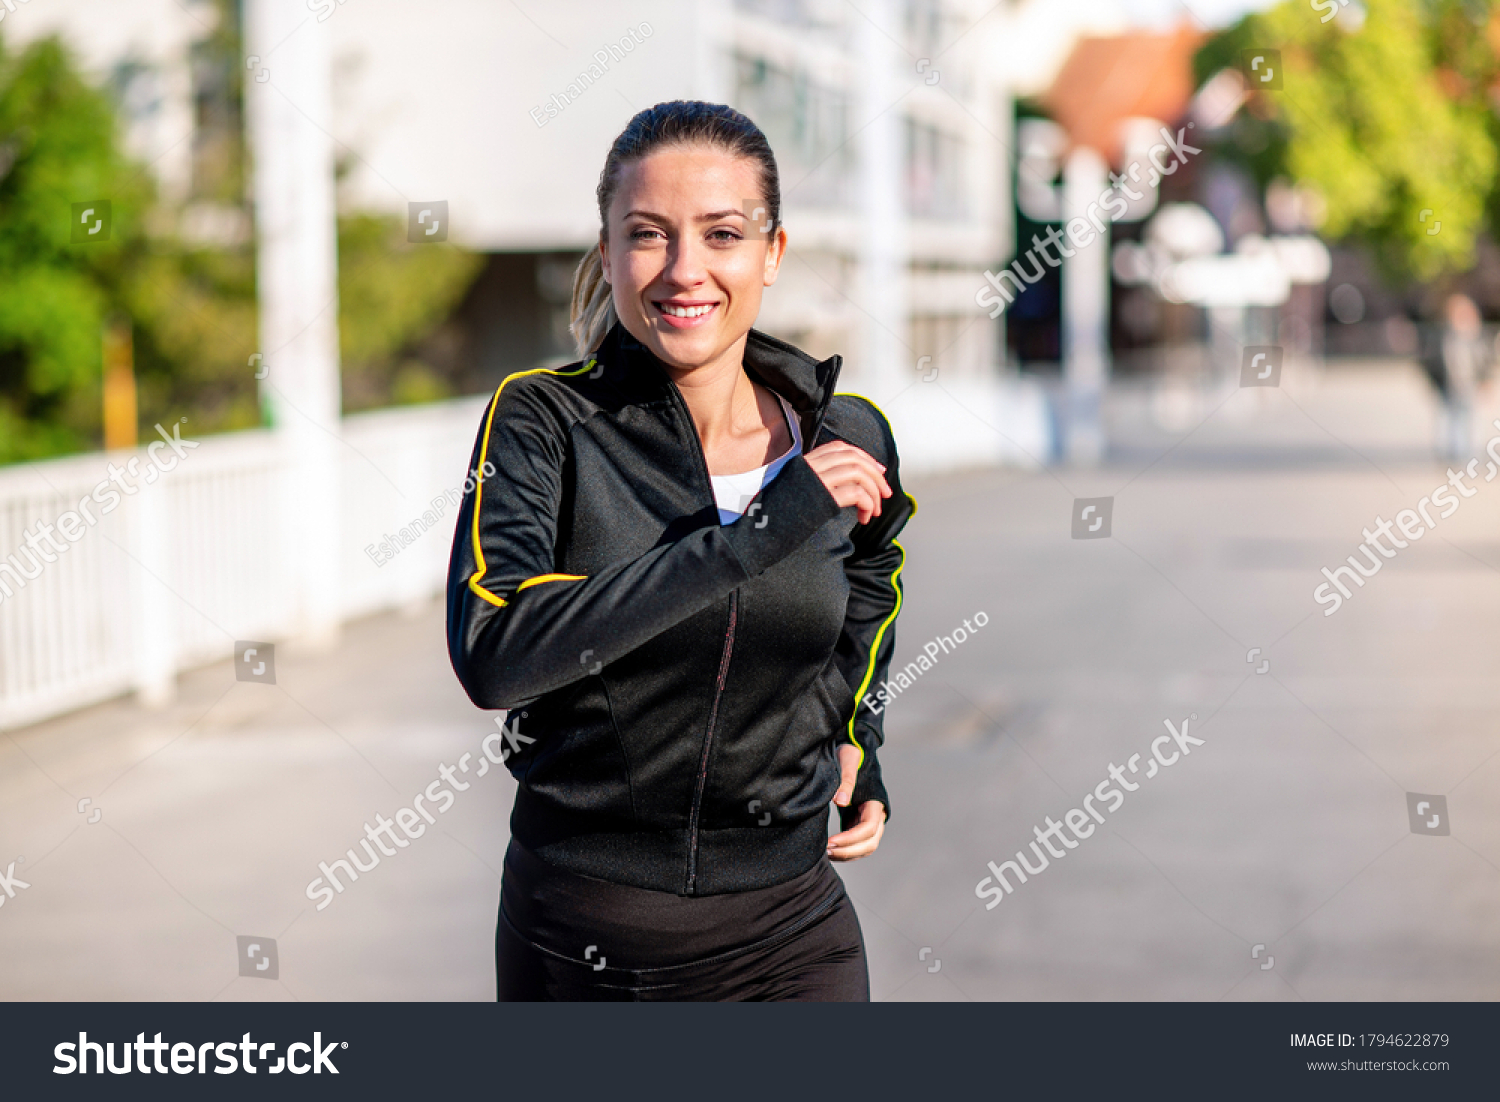 Closeup of a young smiling woman runner in black long sleeve track suit, running across the bridge on a sunny day #1794622879